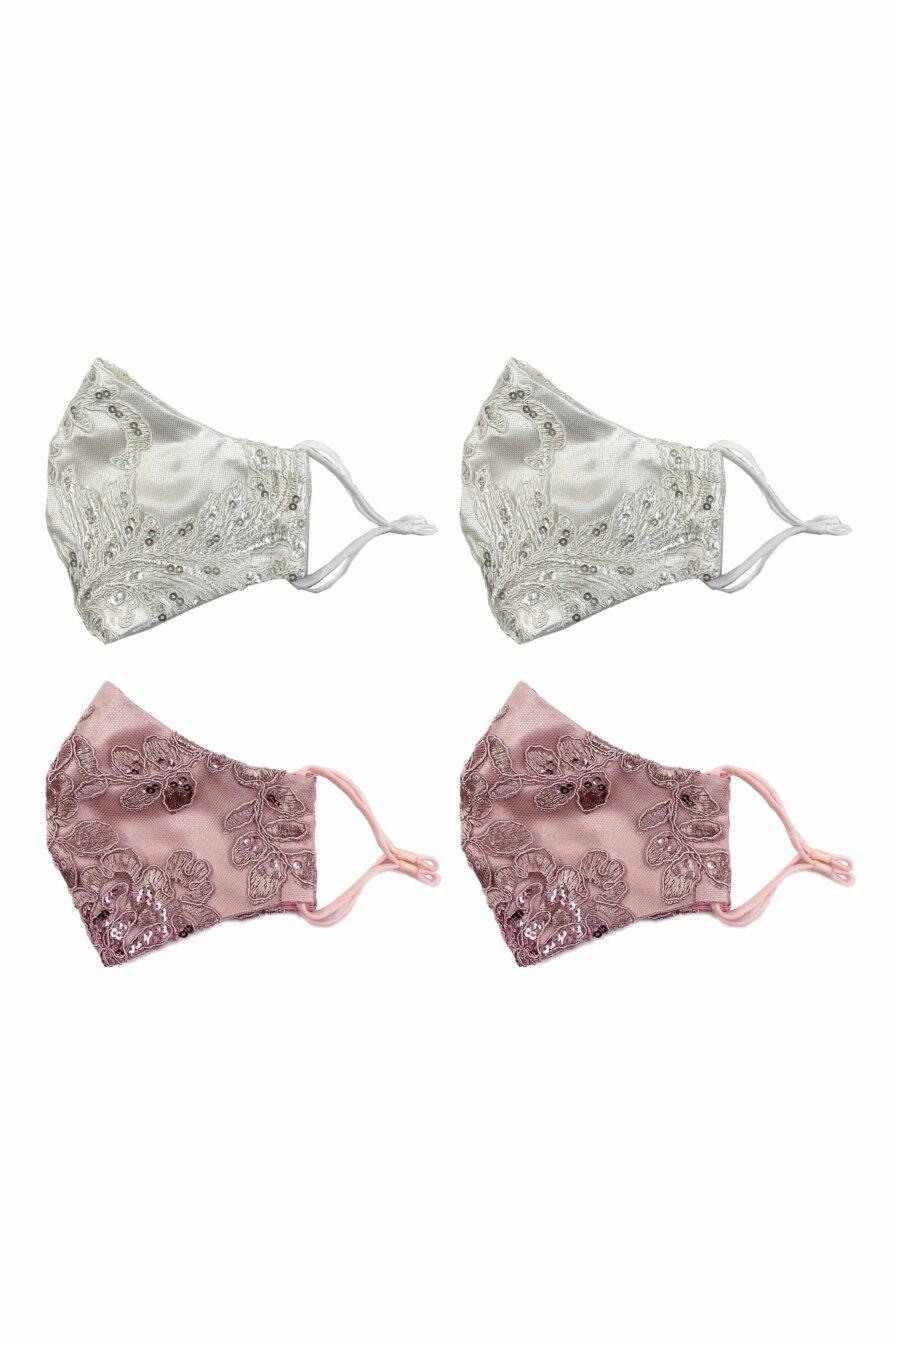 Chie Chic Posh Mask – A Set of Four (2) Silky White & (2) Pink Cherry Masks